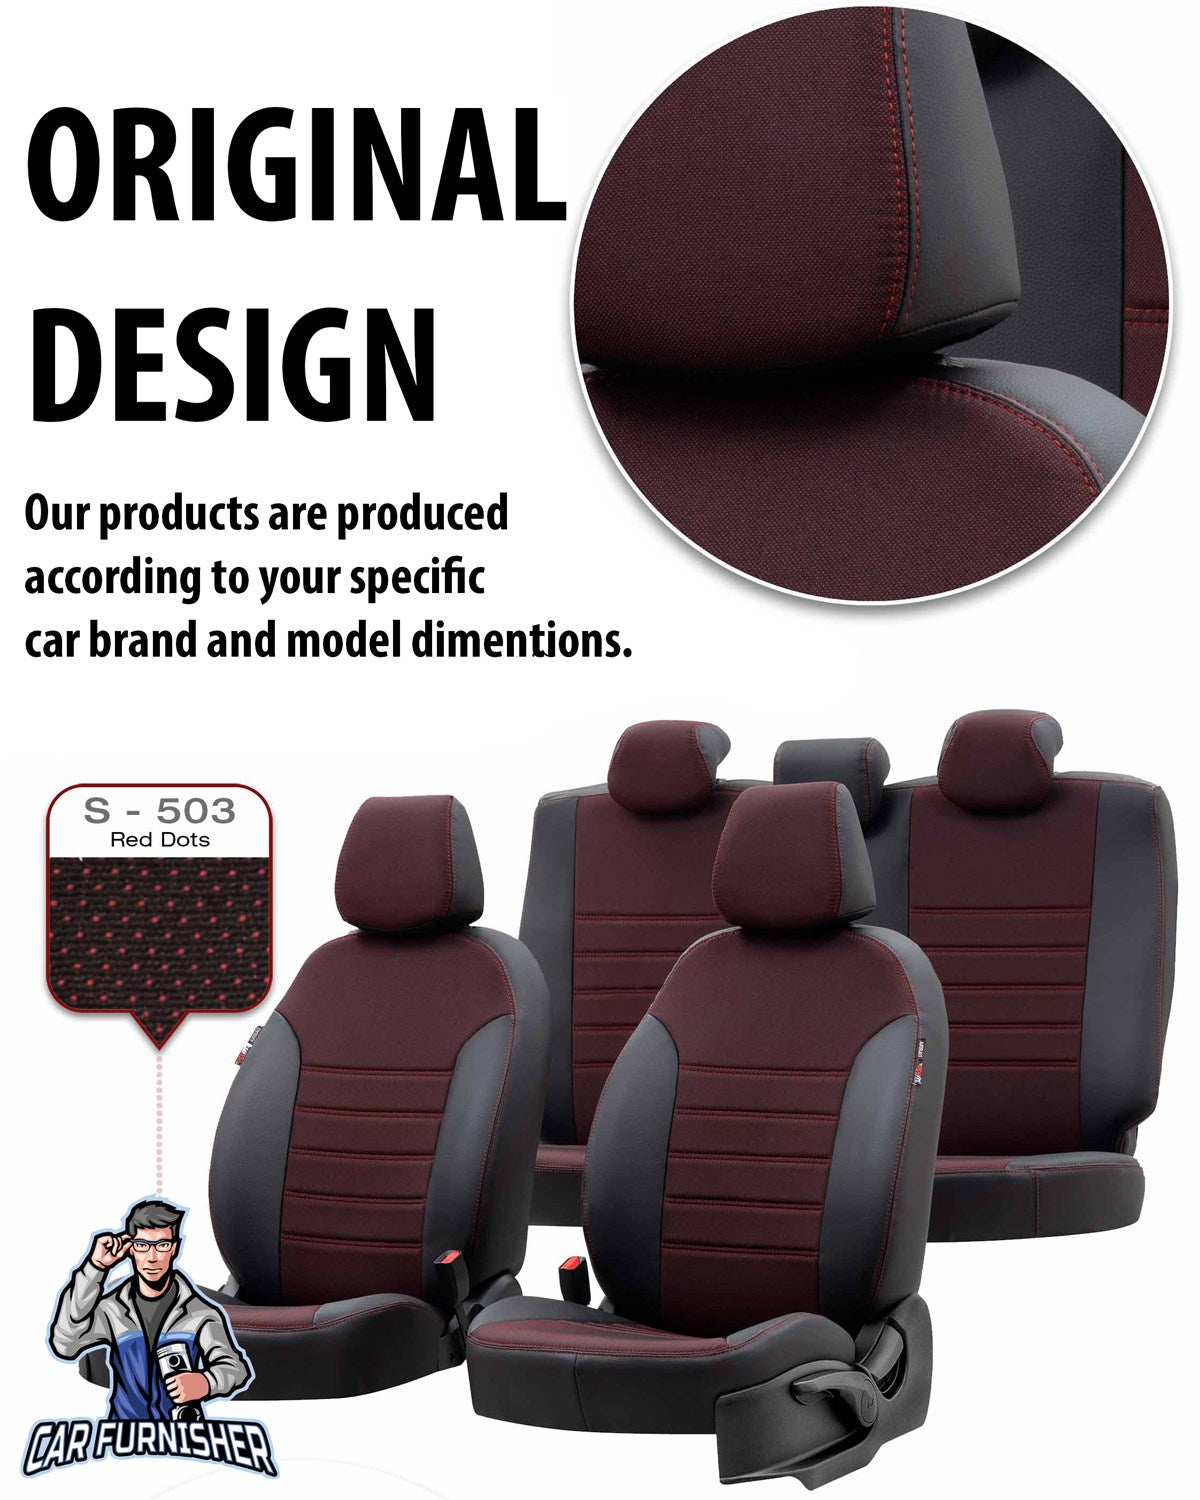 Mercedes GLC Class Seat Covers Paris Leather & Jacquard Design Red Leather & Jacquard Fabric